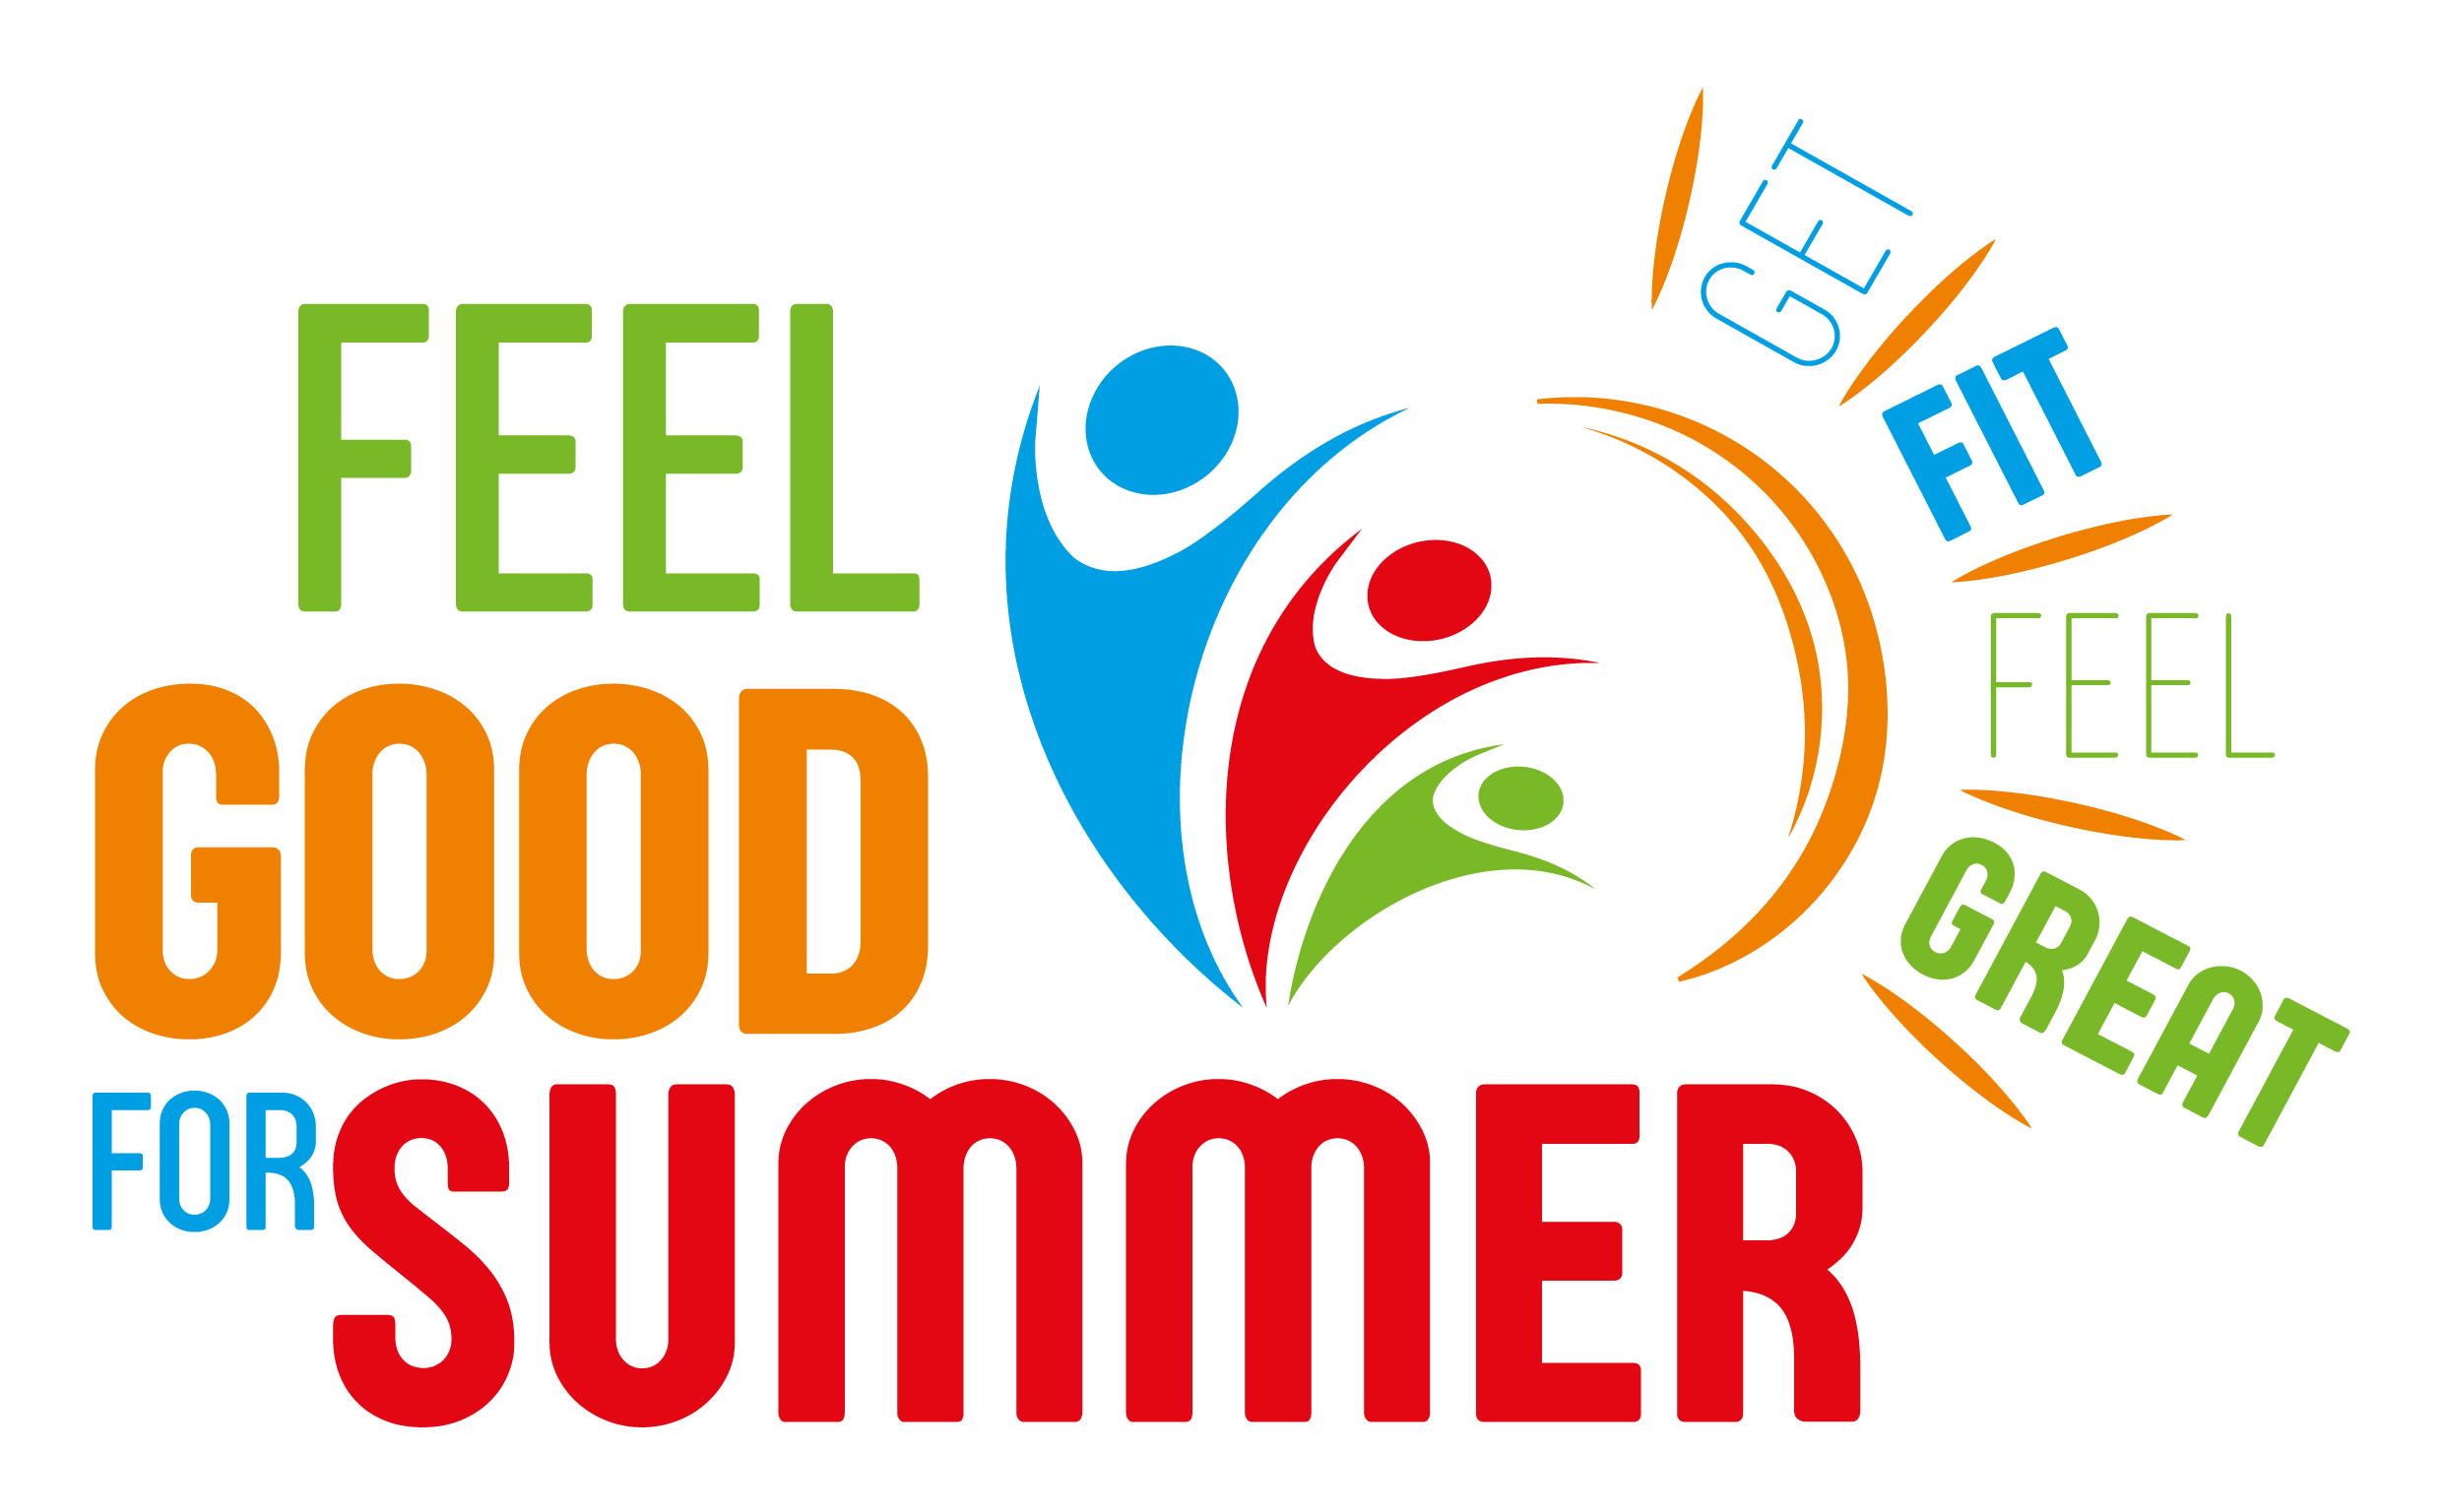 Feel Good for Summer - Summer Gym Membership Offer and More